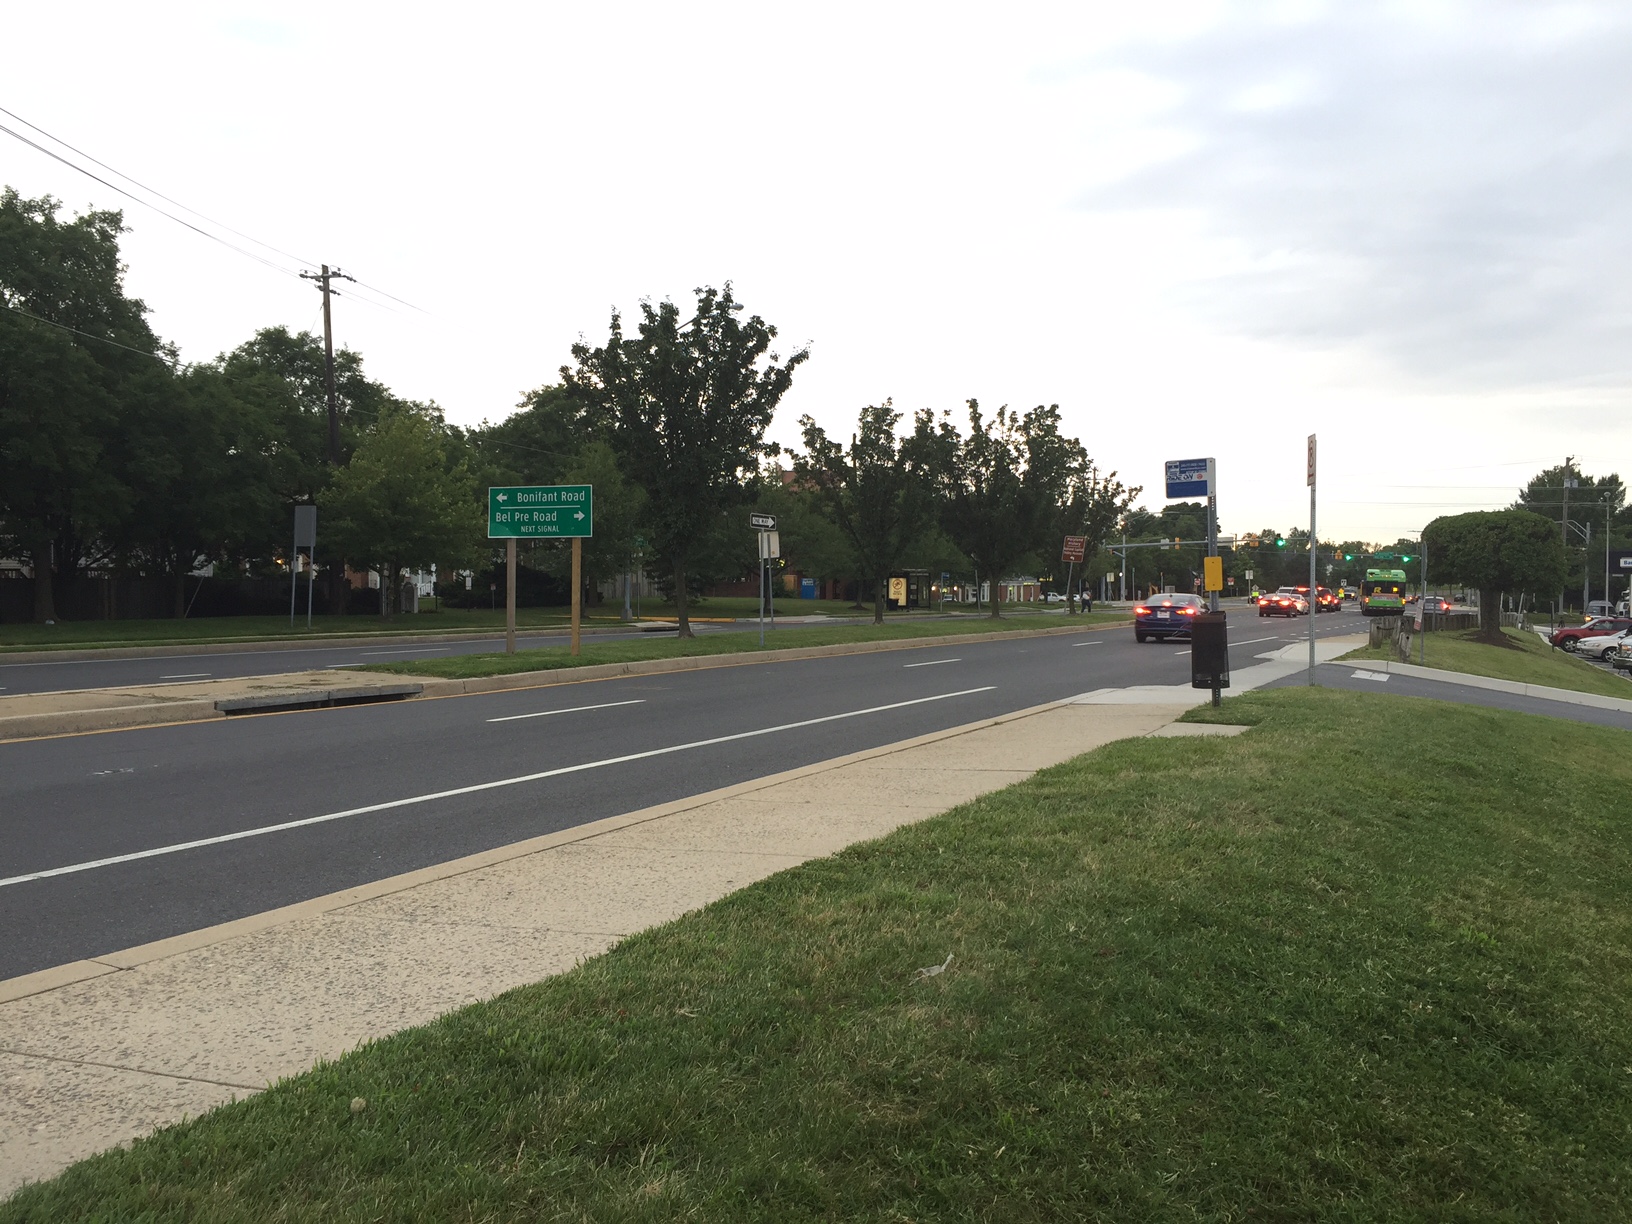 Layhill Road at Bel Pre Road, where a pedestrian was stuck and killed by a car Thursday night. (WTOP/Dennis Foley)